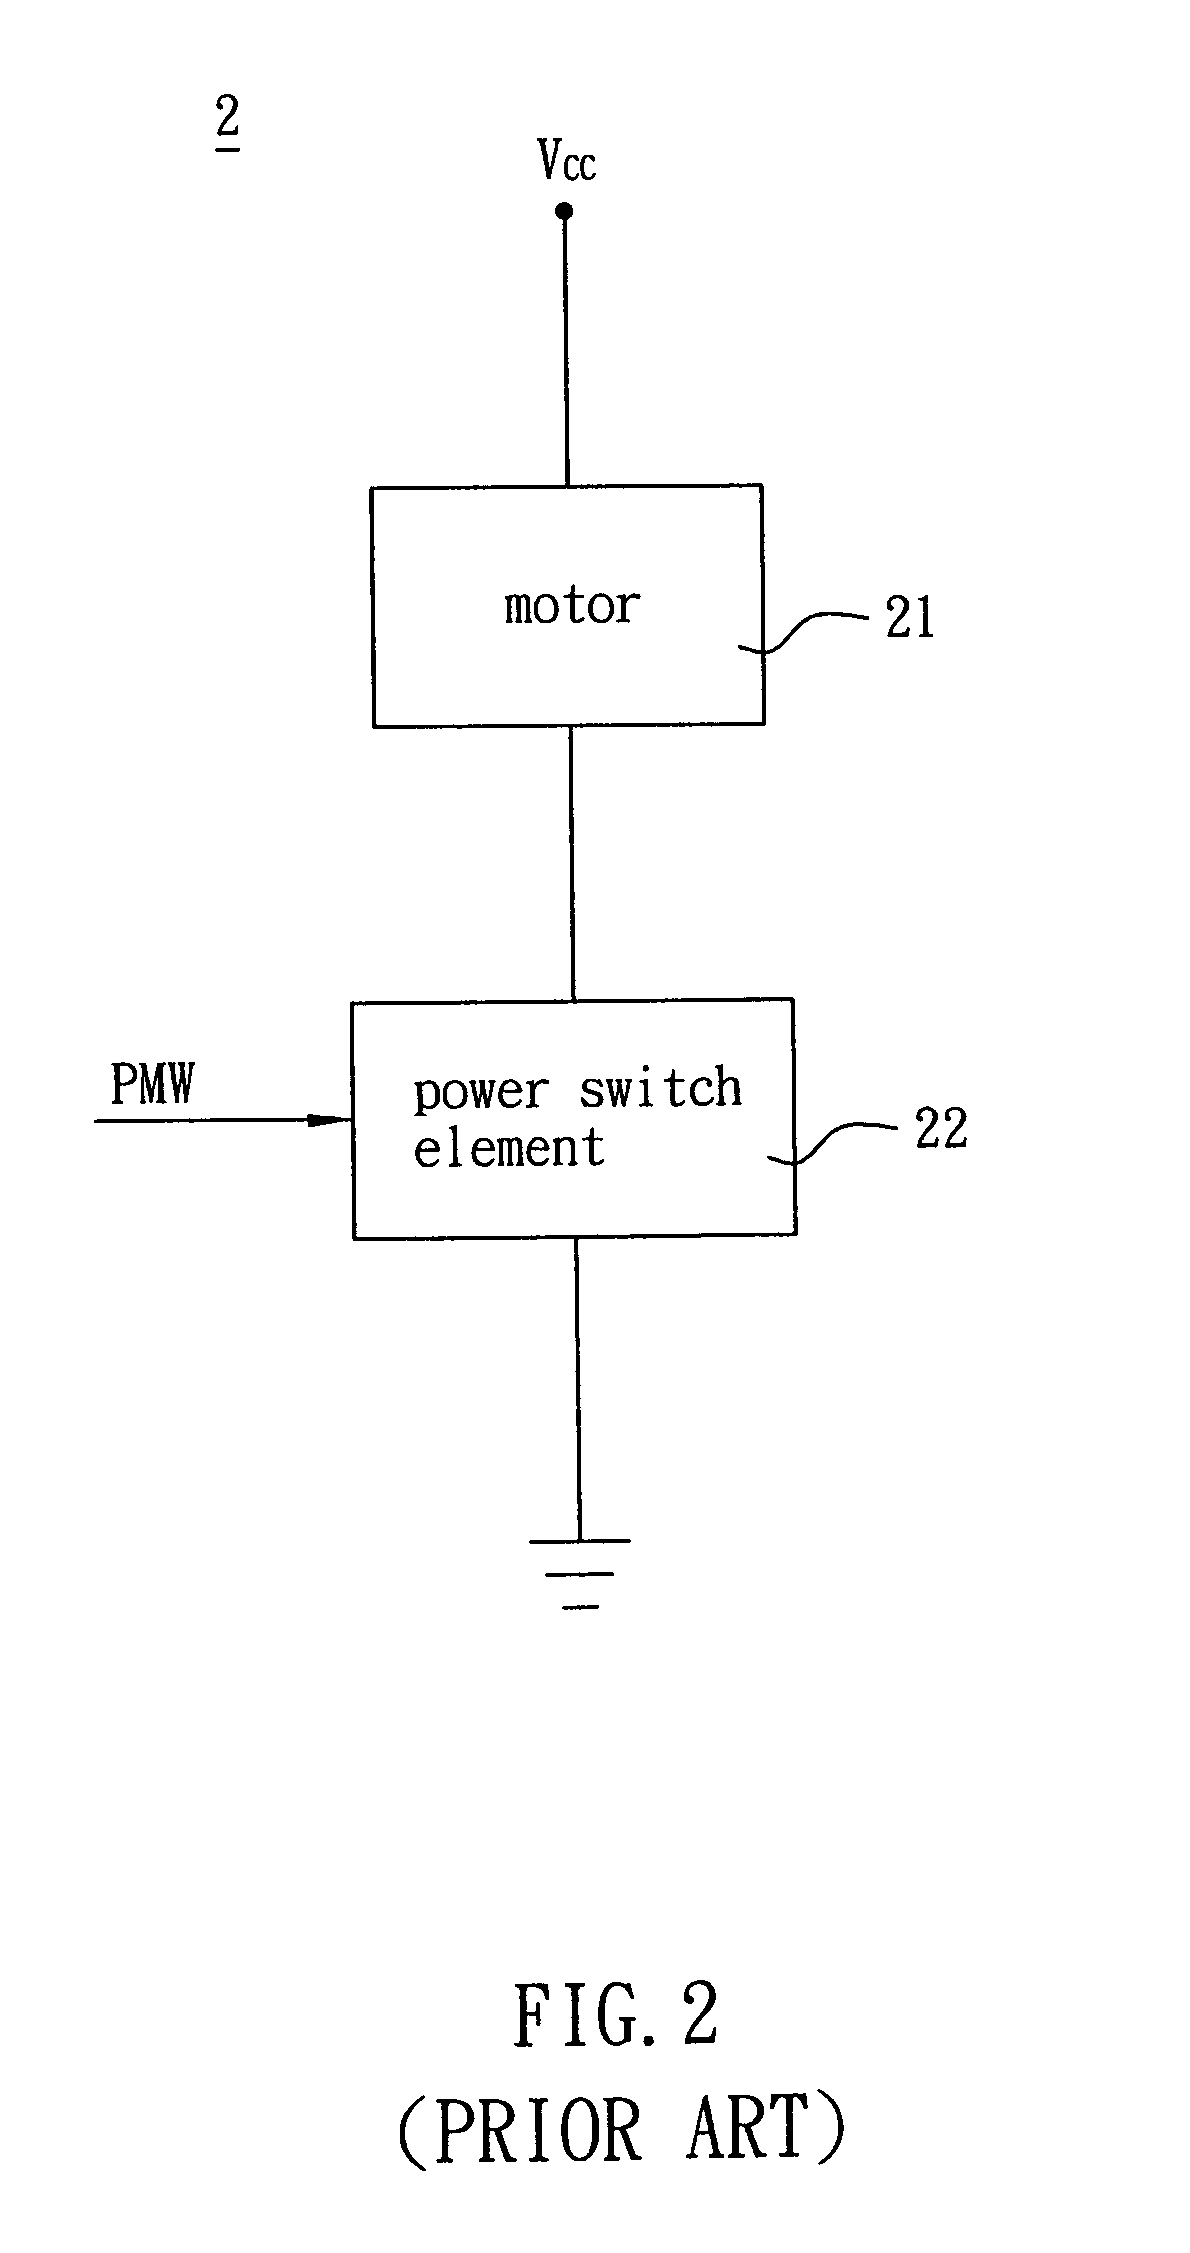 Fan speed control device and method